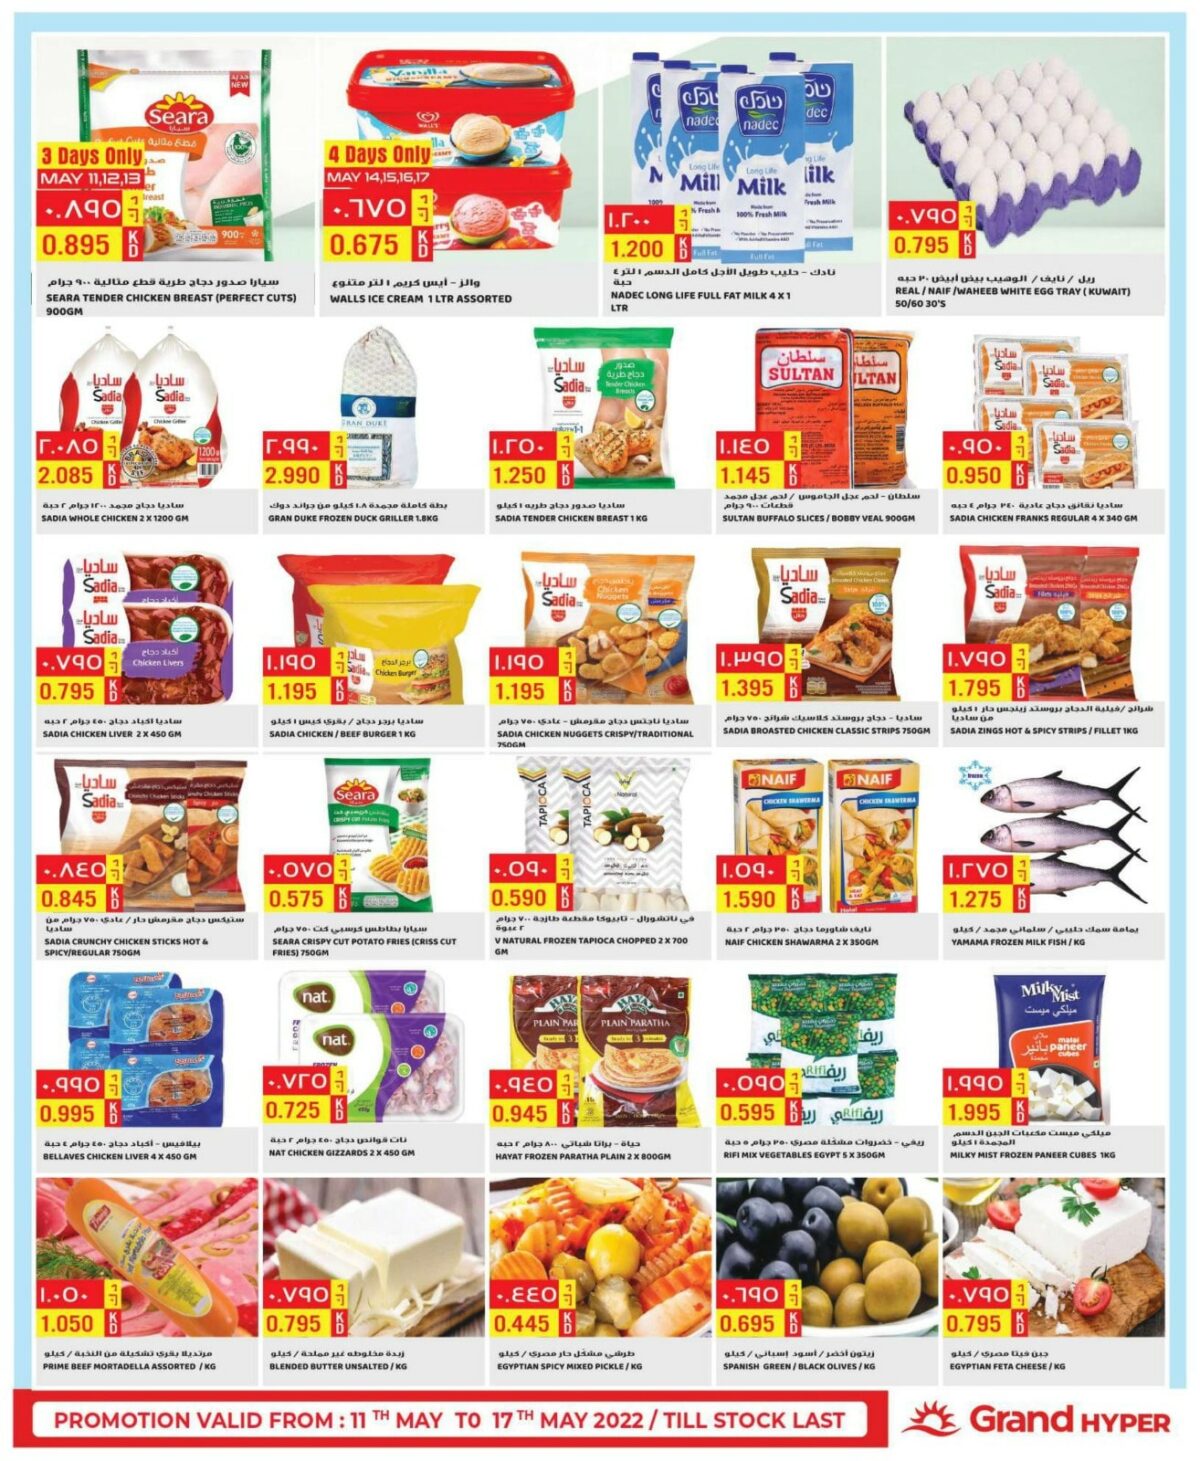 Grand Hypermarket Special Offers, iiQ8 weekly promotions 9